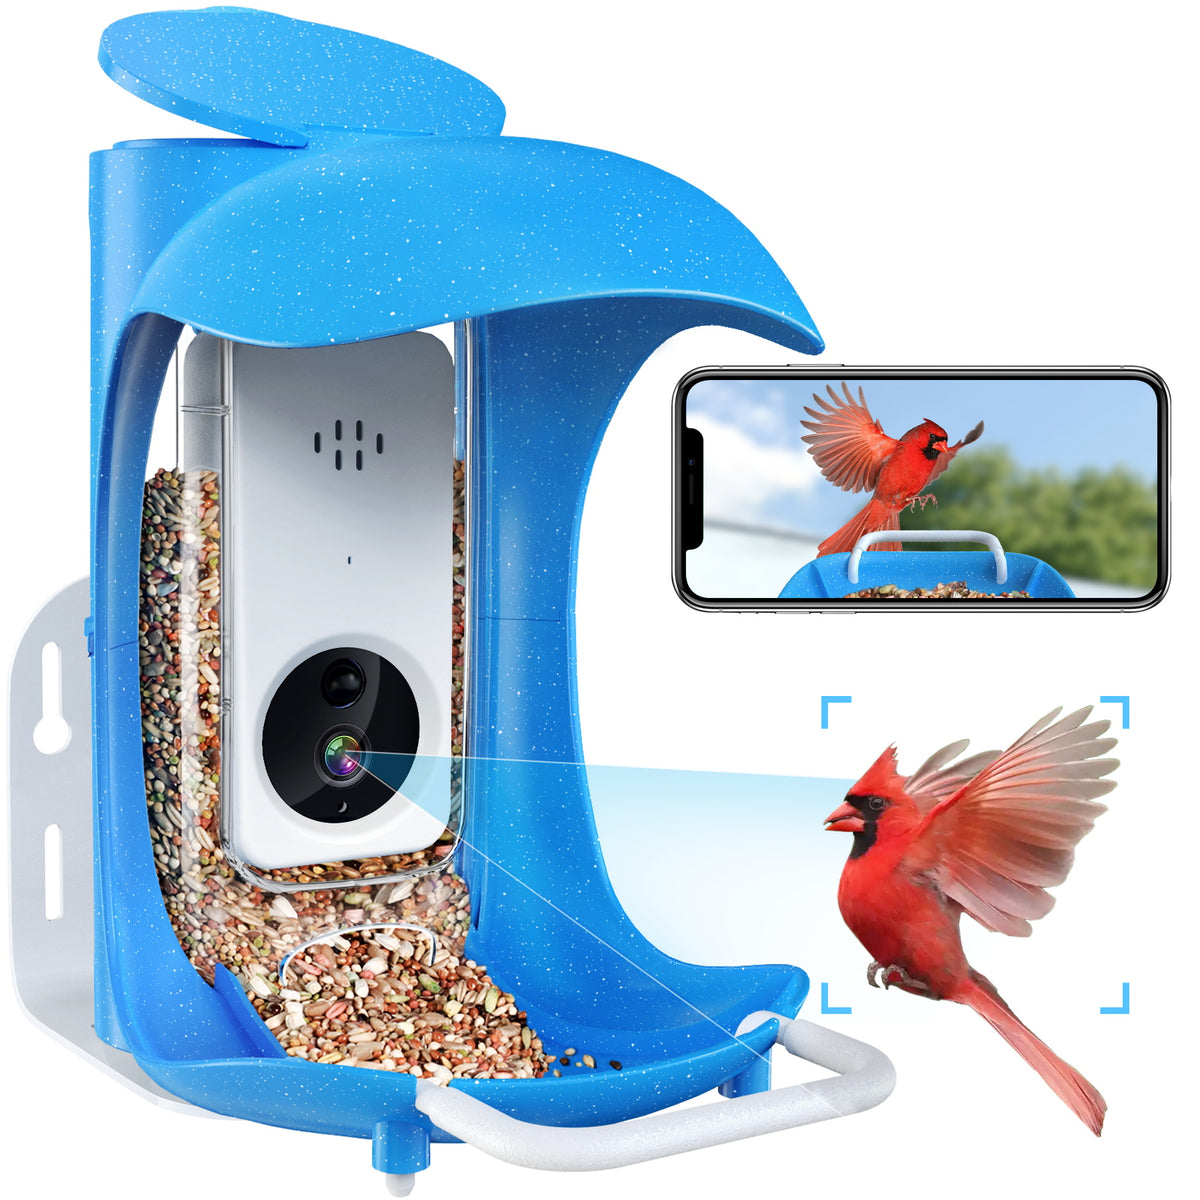 Smart bird feeder snaps bird selfies for collectible game and conservation  tool - CNET